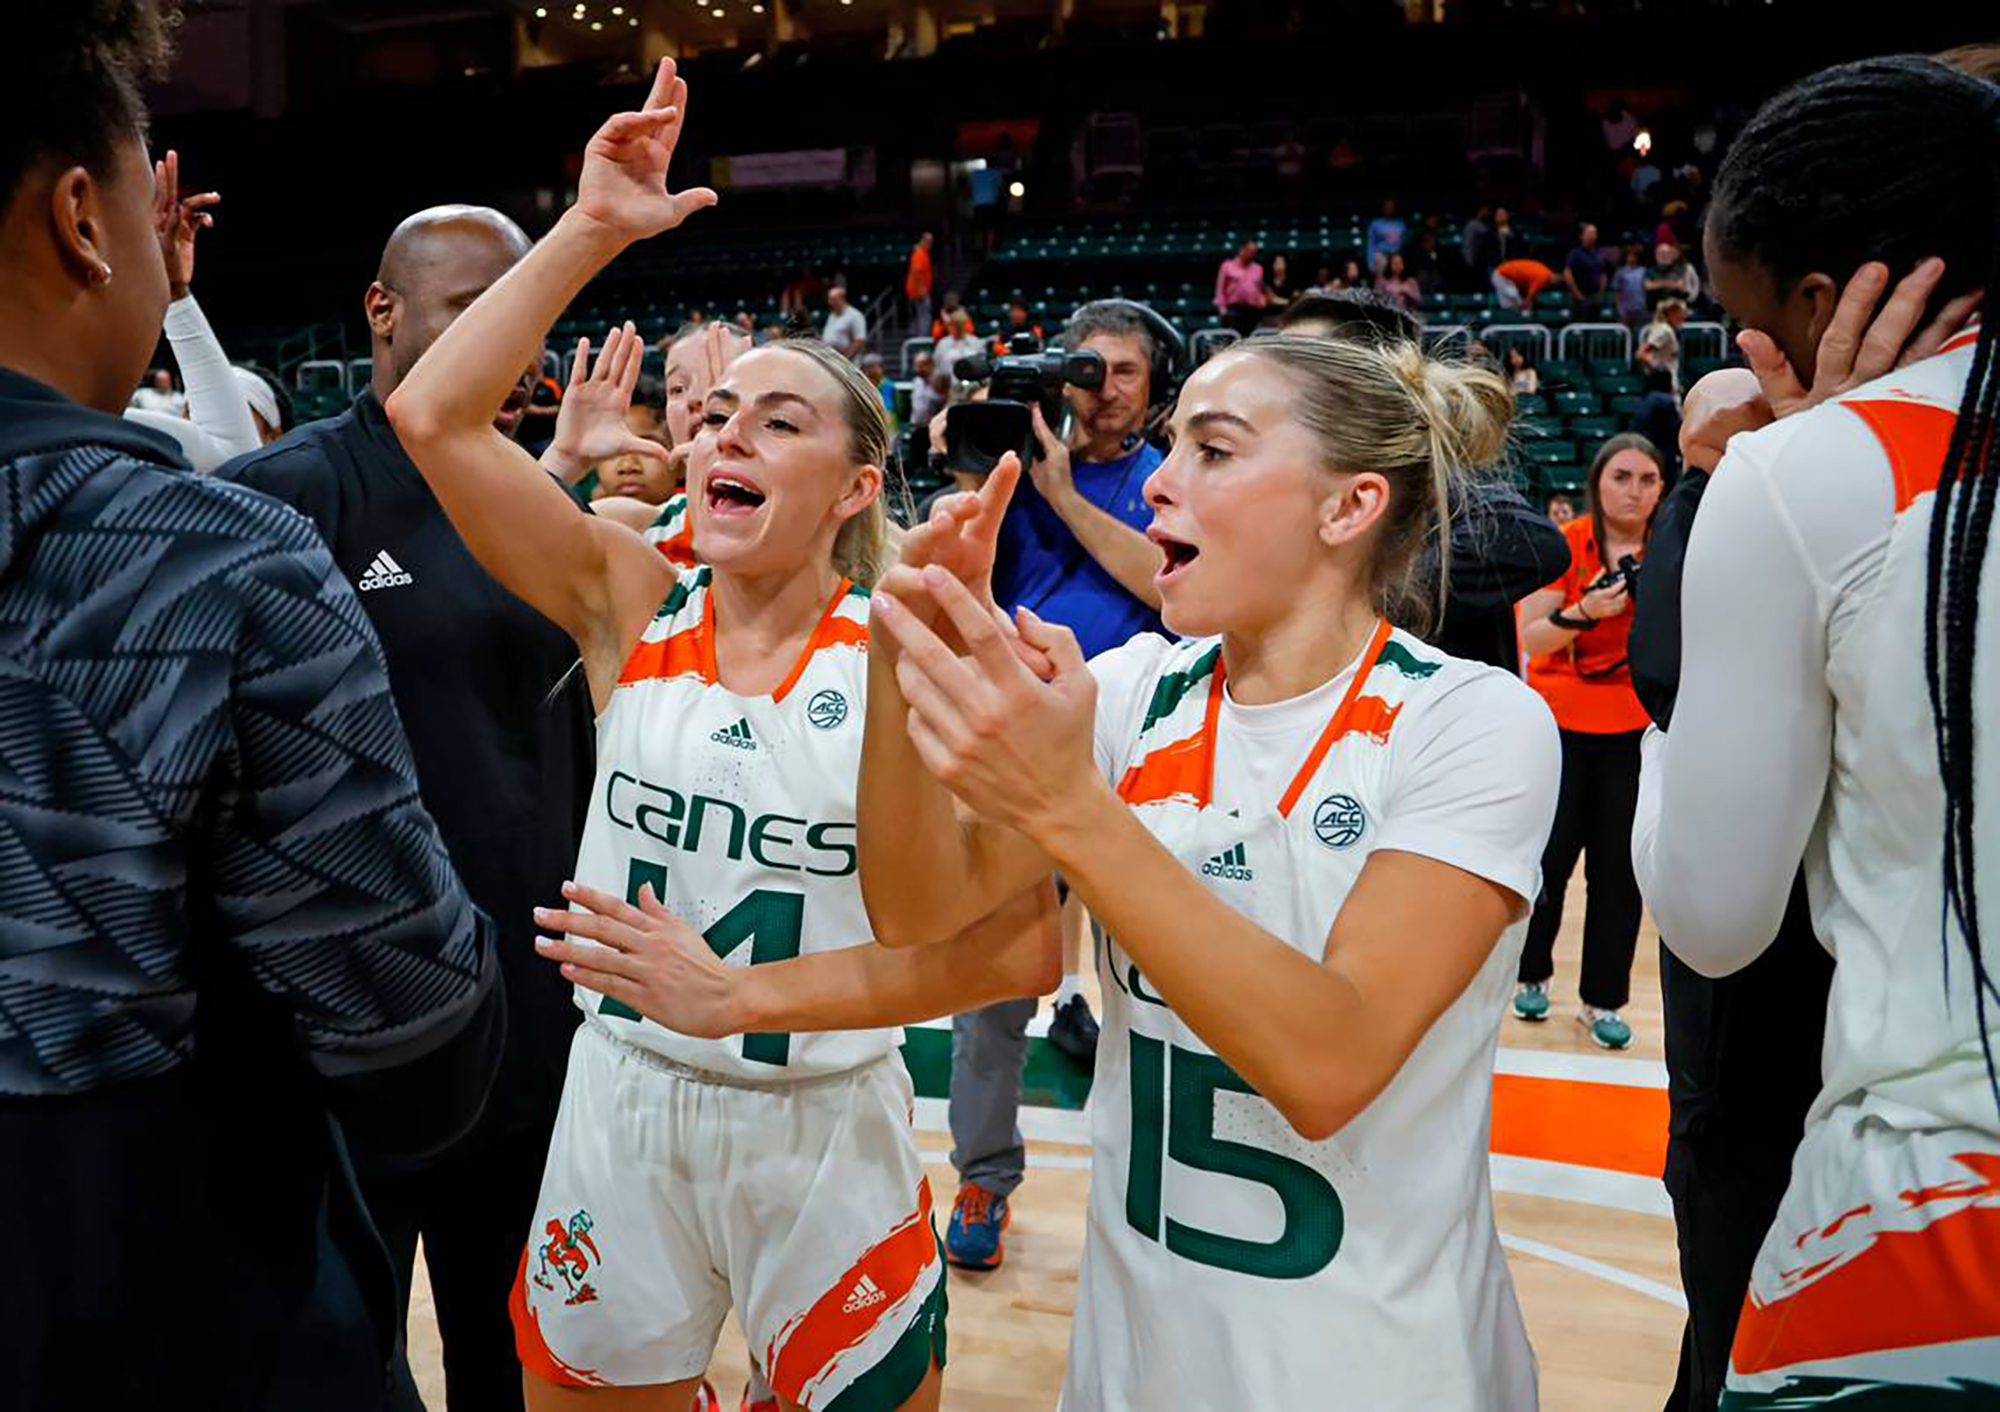 Miami’s Haley Cavinder and Hanna Cavinder celebrate after an 86-82 win against Florida State at the Watsco Center on Feb. 9, 2023, in Coral Gables, Florida.